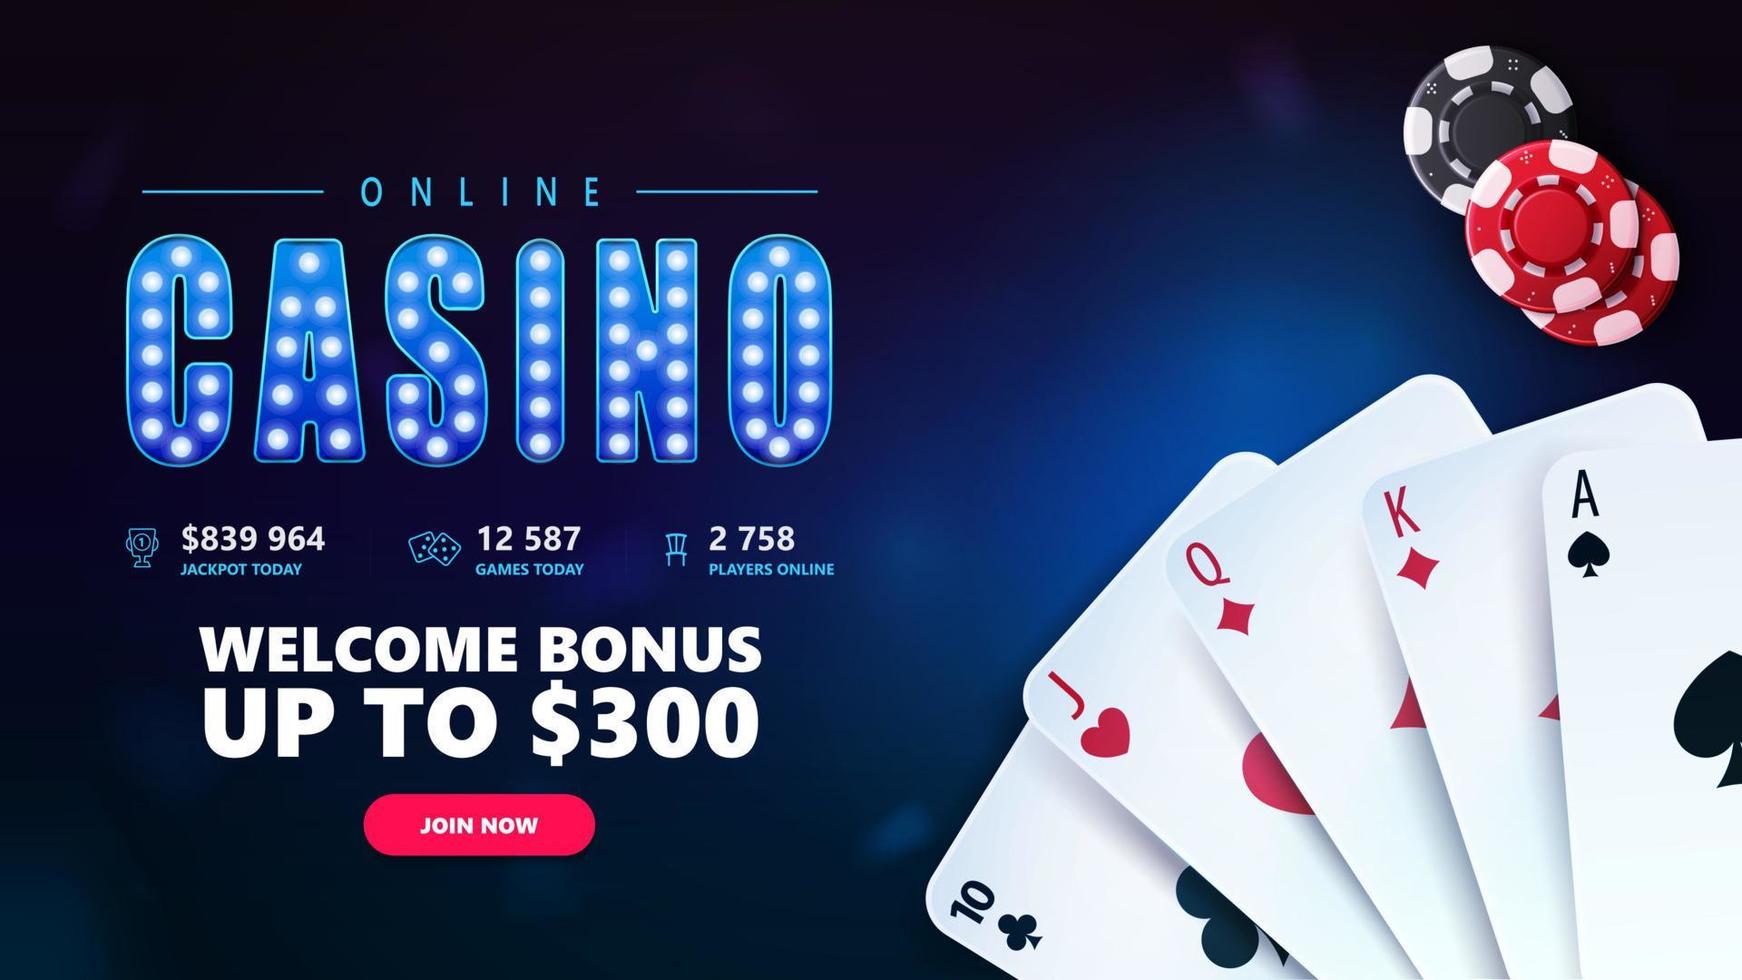 Online casino, blue invitation banner for website with button, welcome bonus, casino playing cards and poker chips on blue background, top view vector